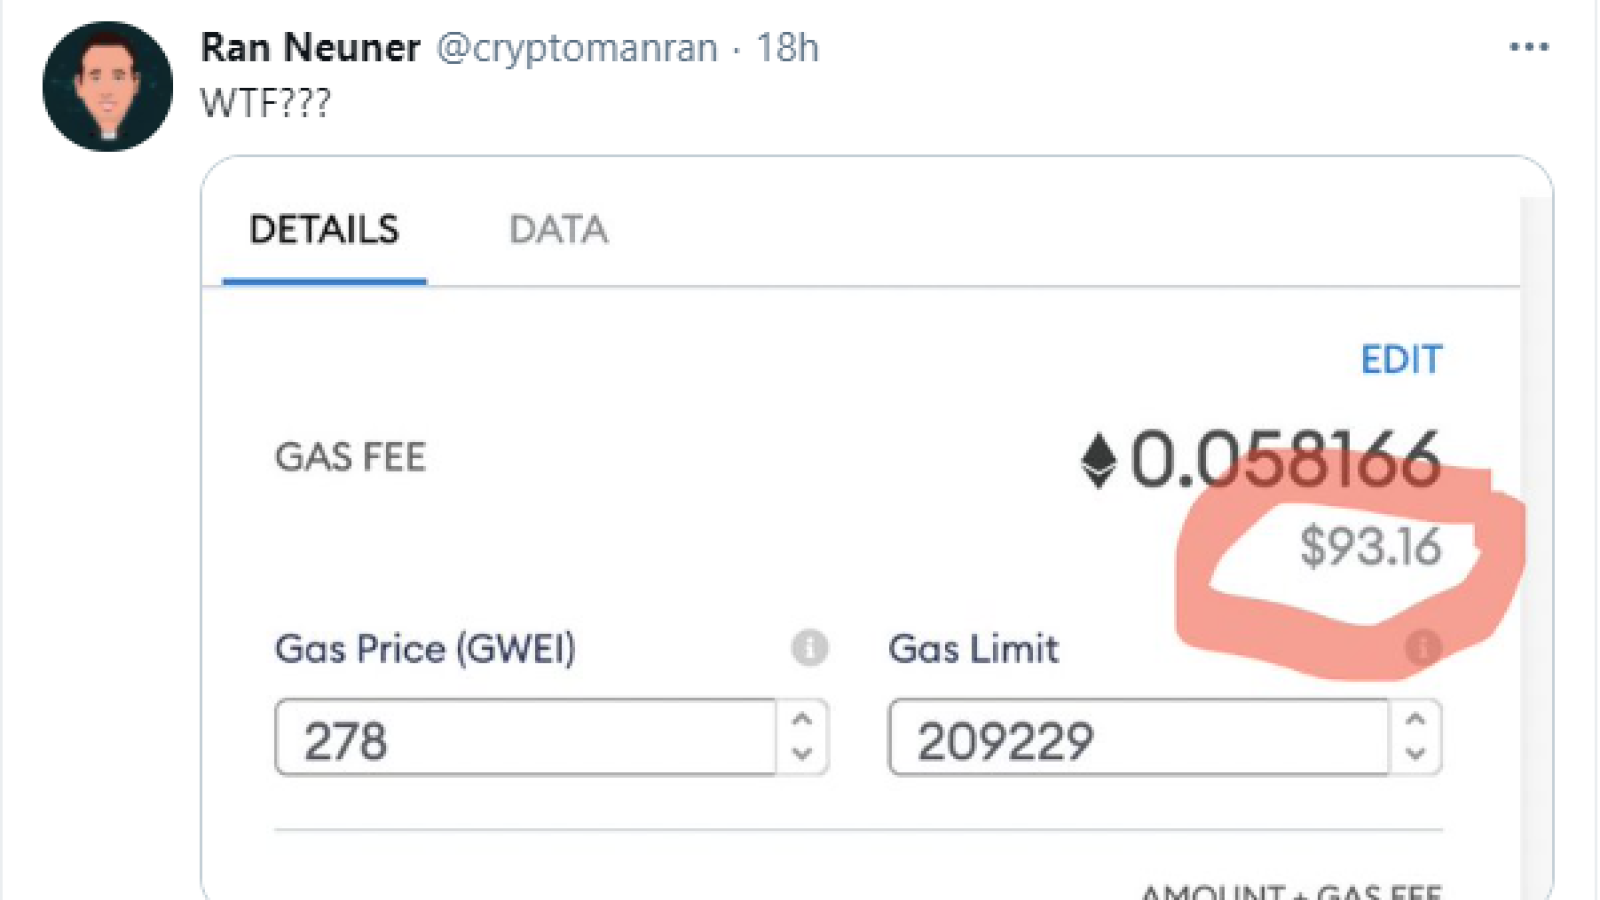 $100 for one Ethereum transaction